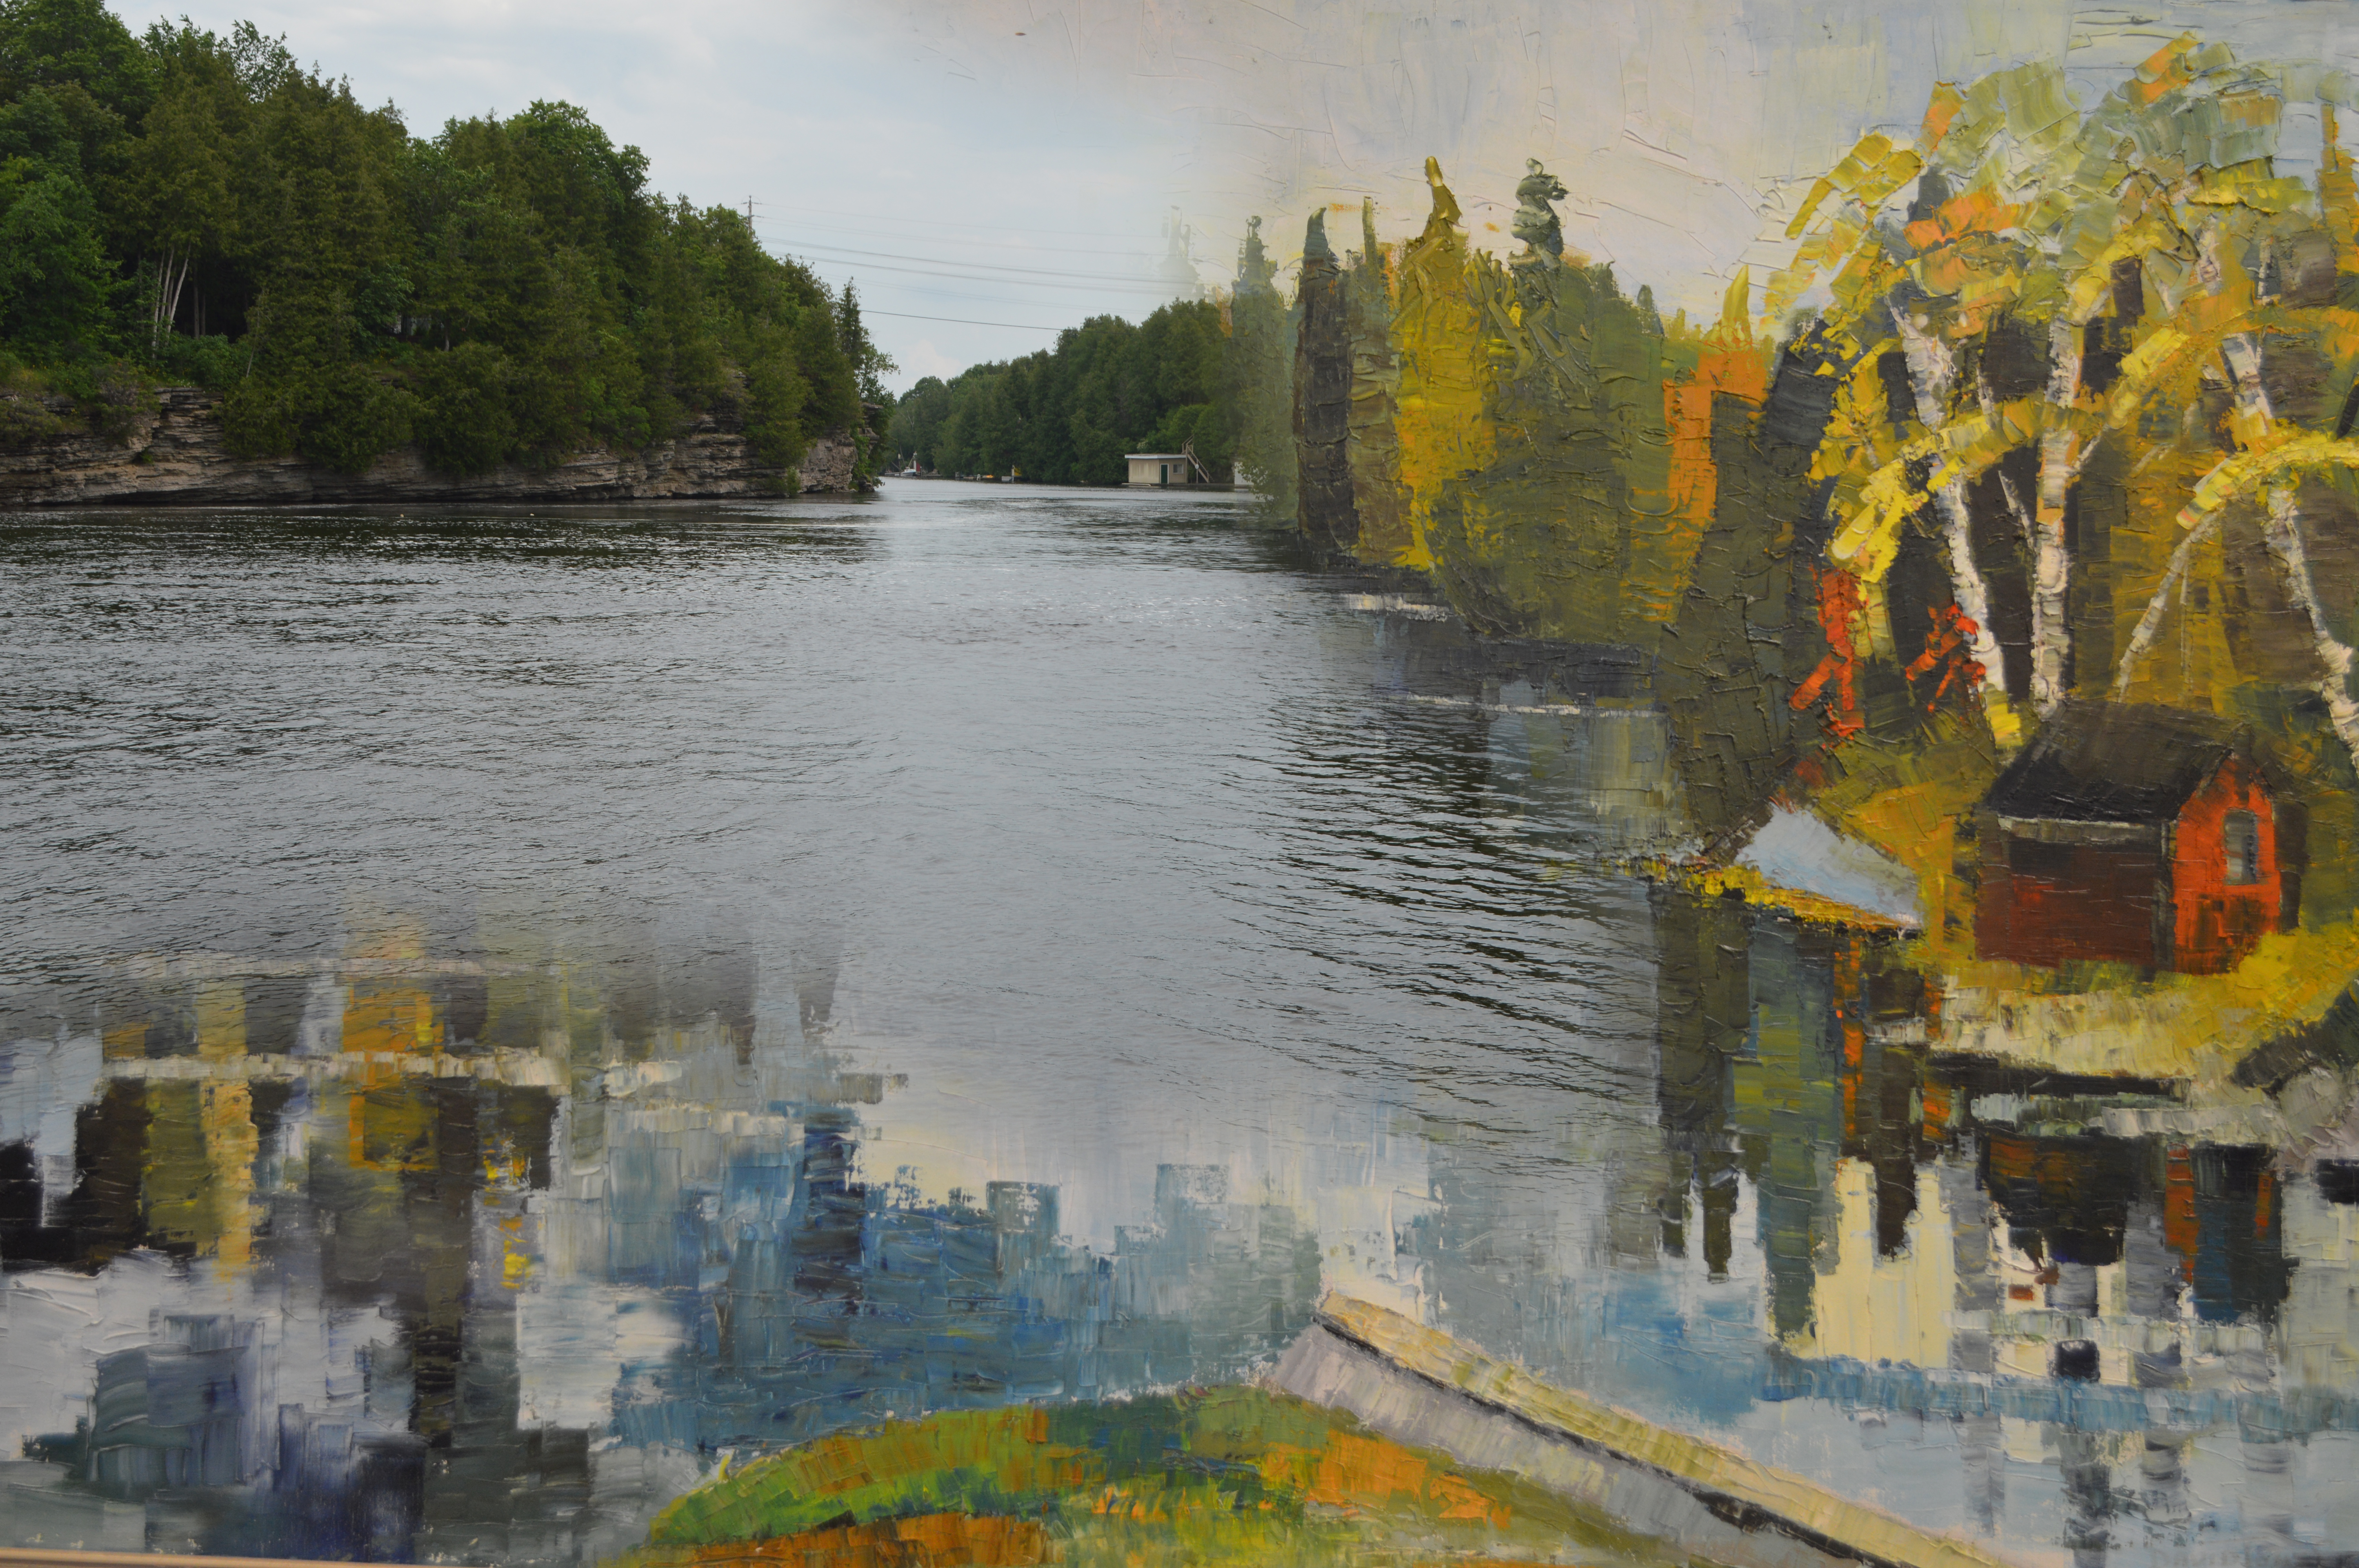 A contemporary photograph of a river and gorge with painting superimposed.